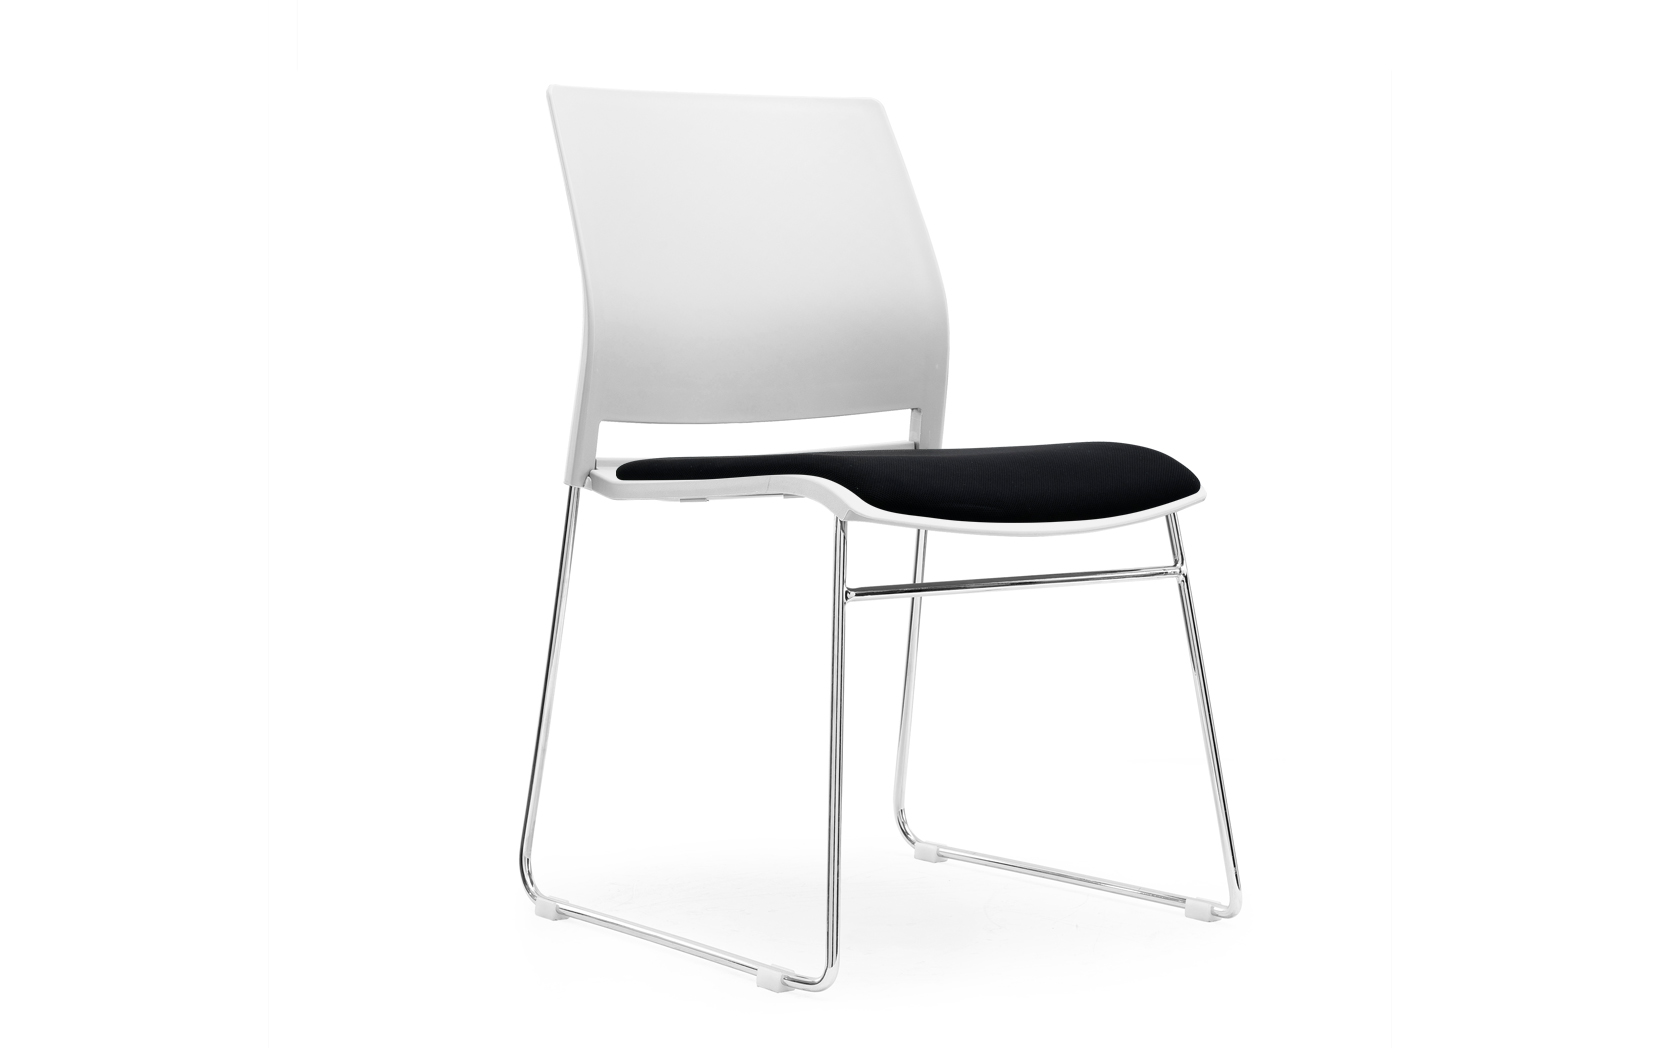 Multi purpose skid frame chair plastic seat and back stacks 10 high White  , Black Seat pad 